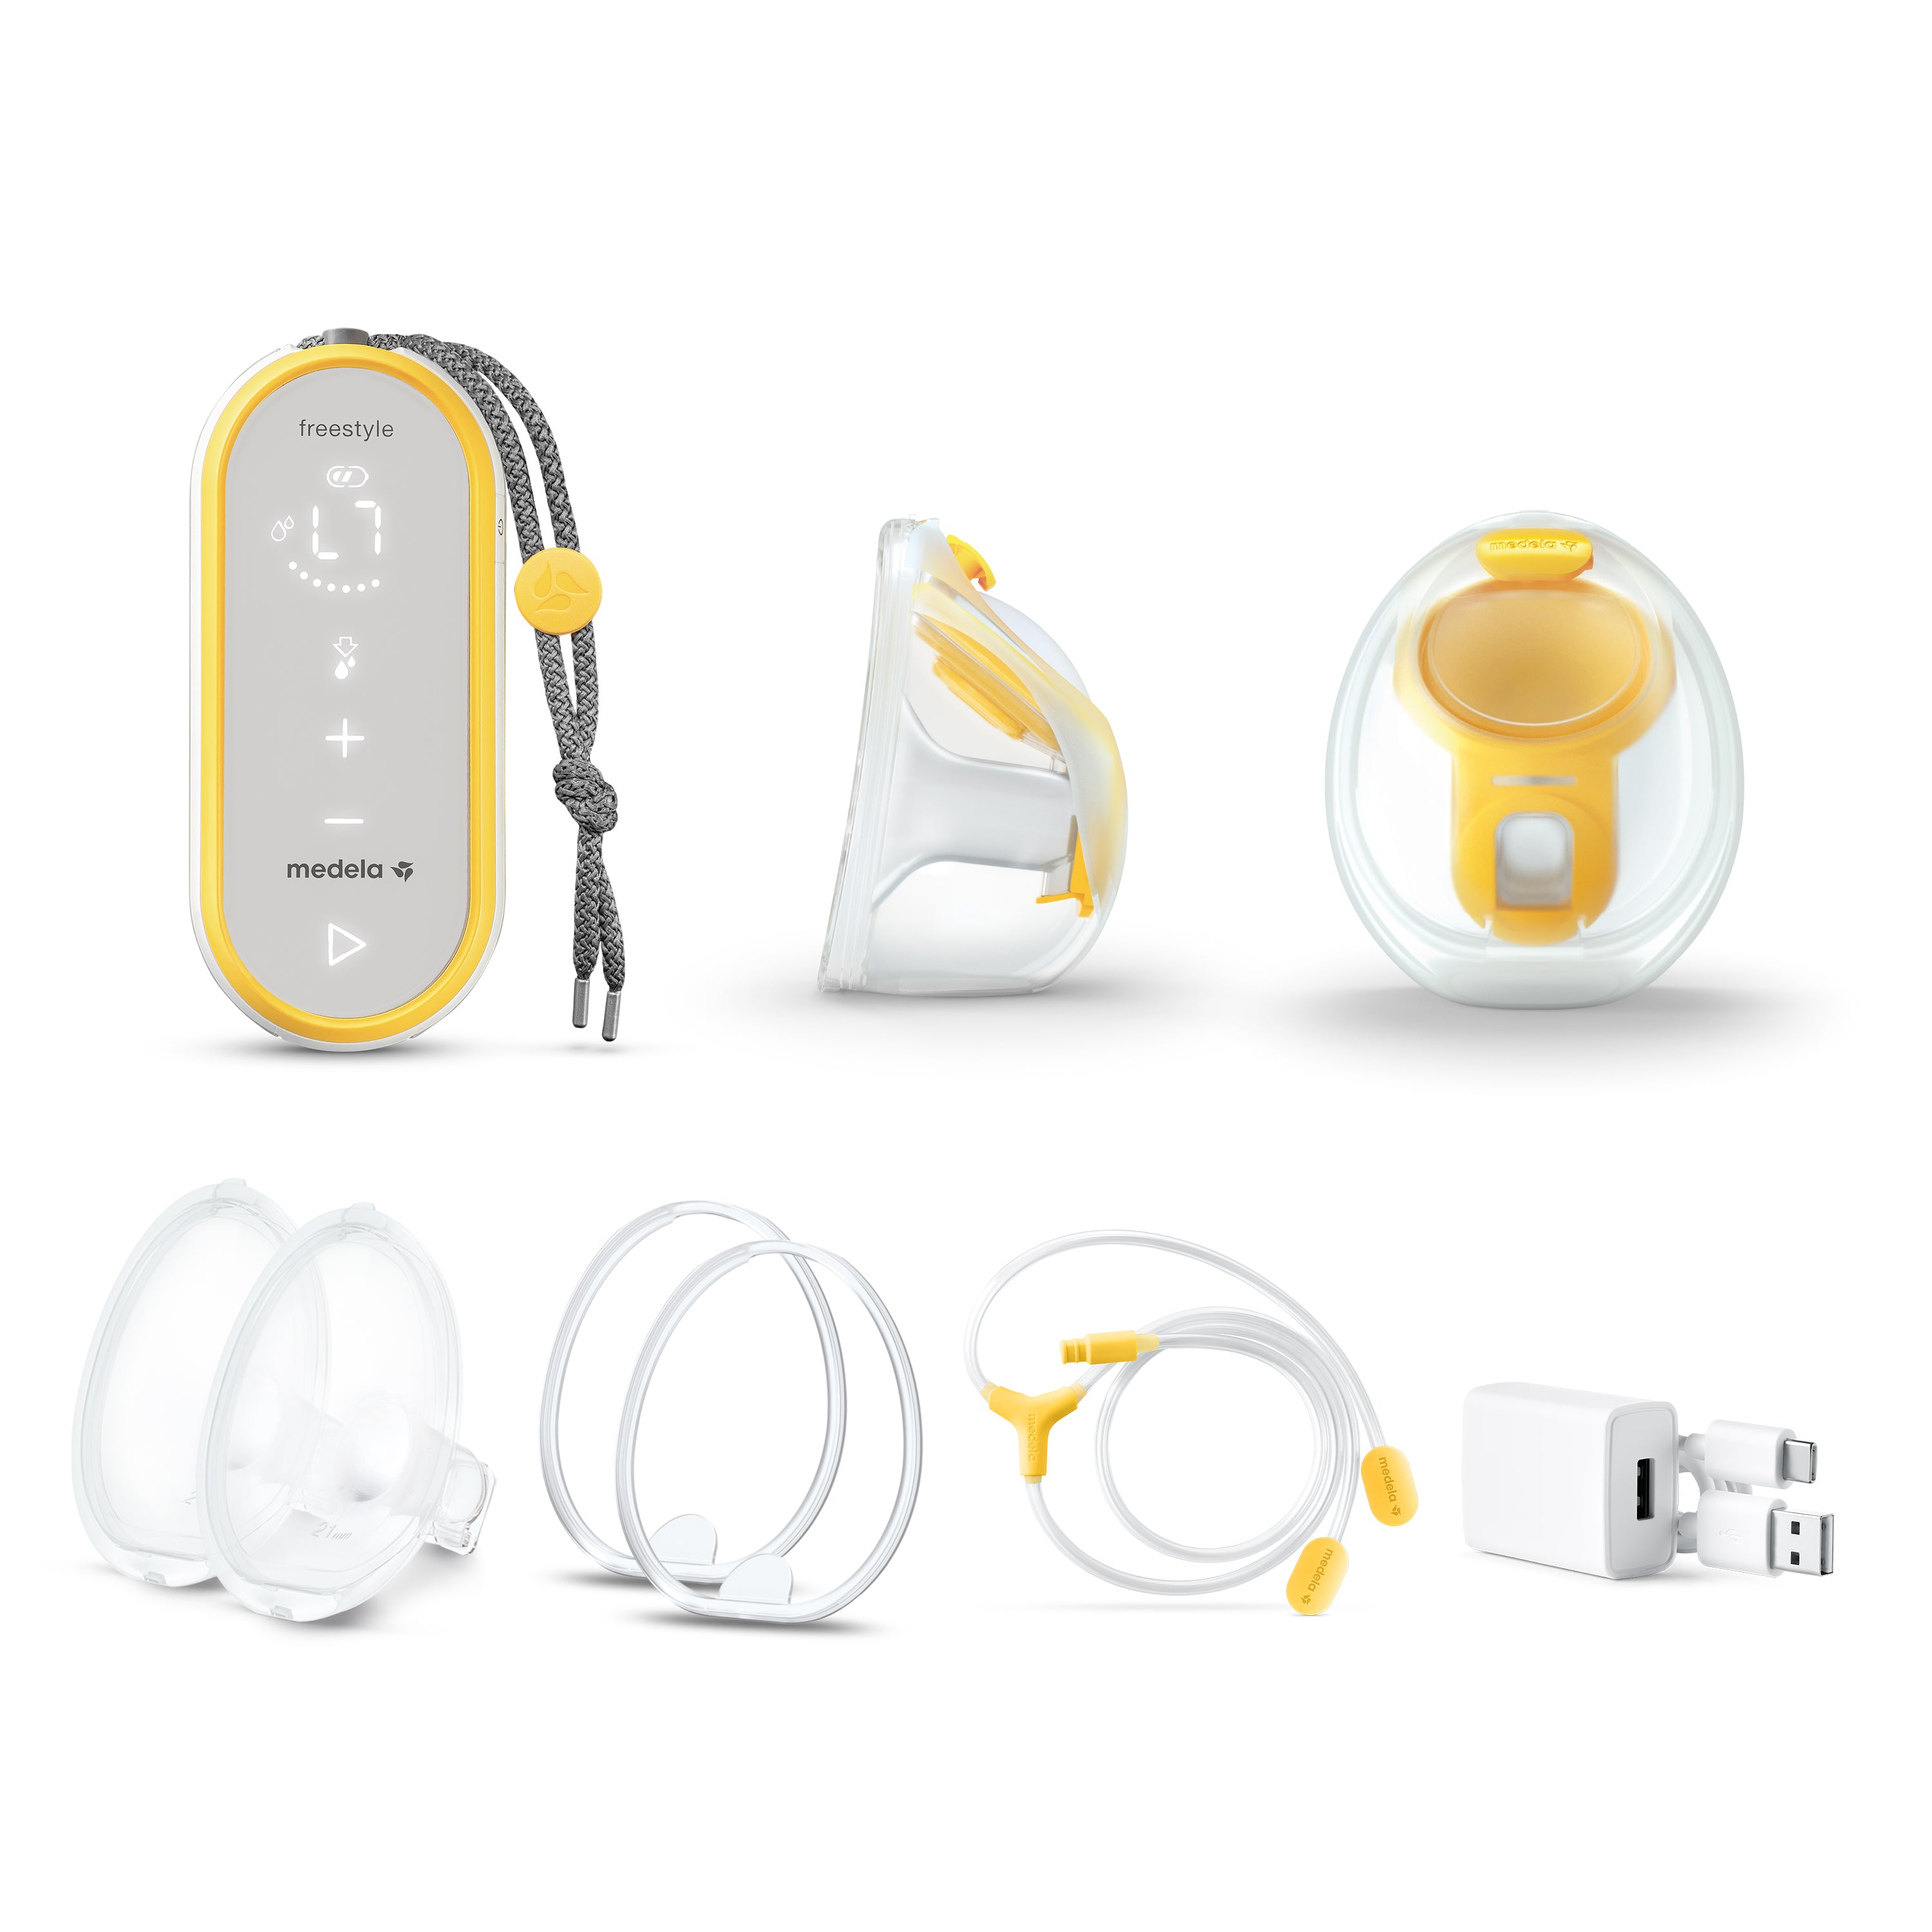 Medela Freestyle Hands-free Double Electric Breastpump + Freebies